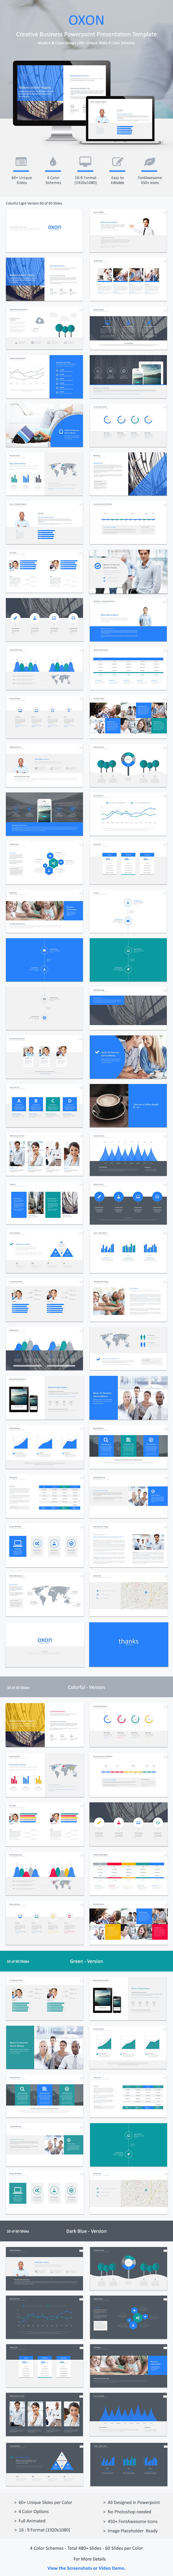 Oxon - Powerpoint Business Template